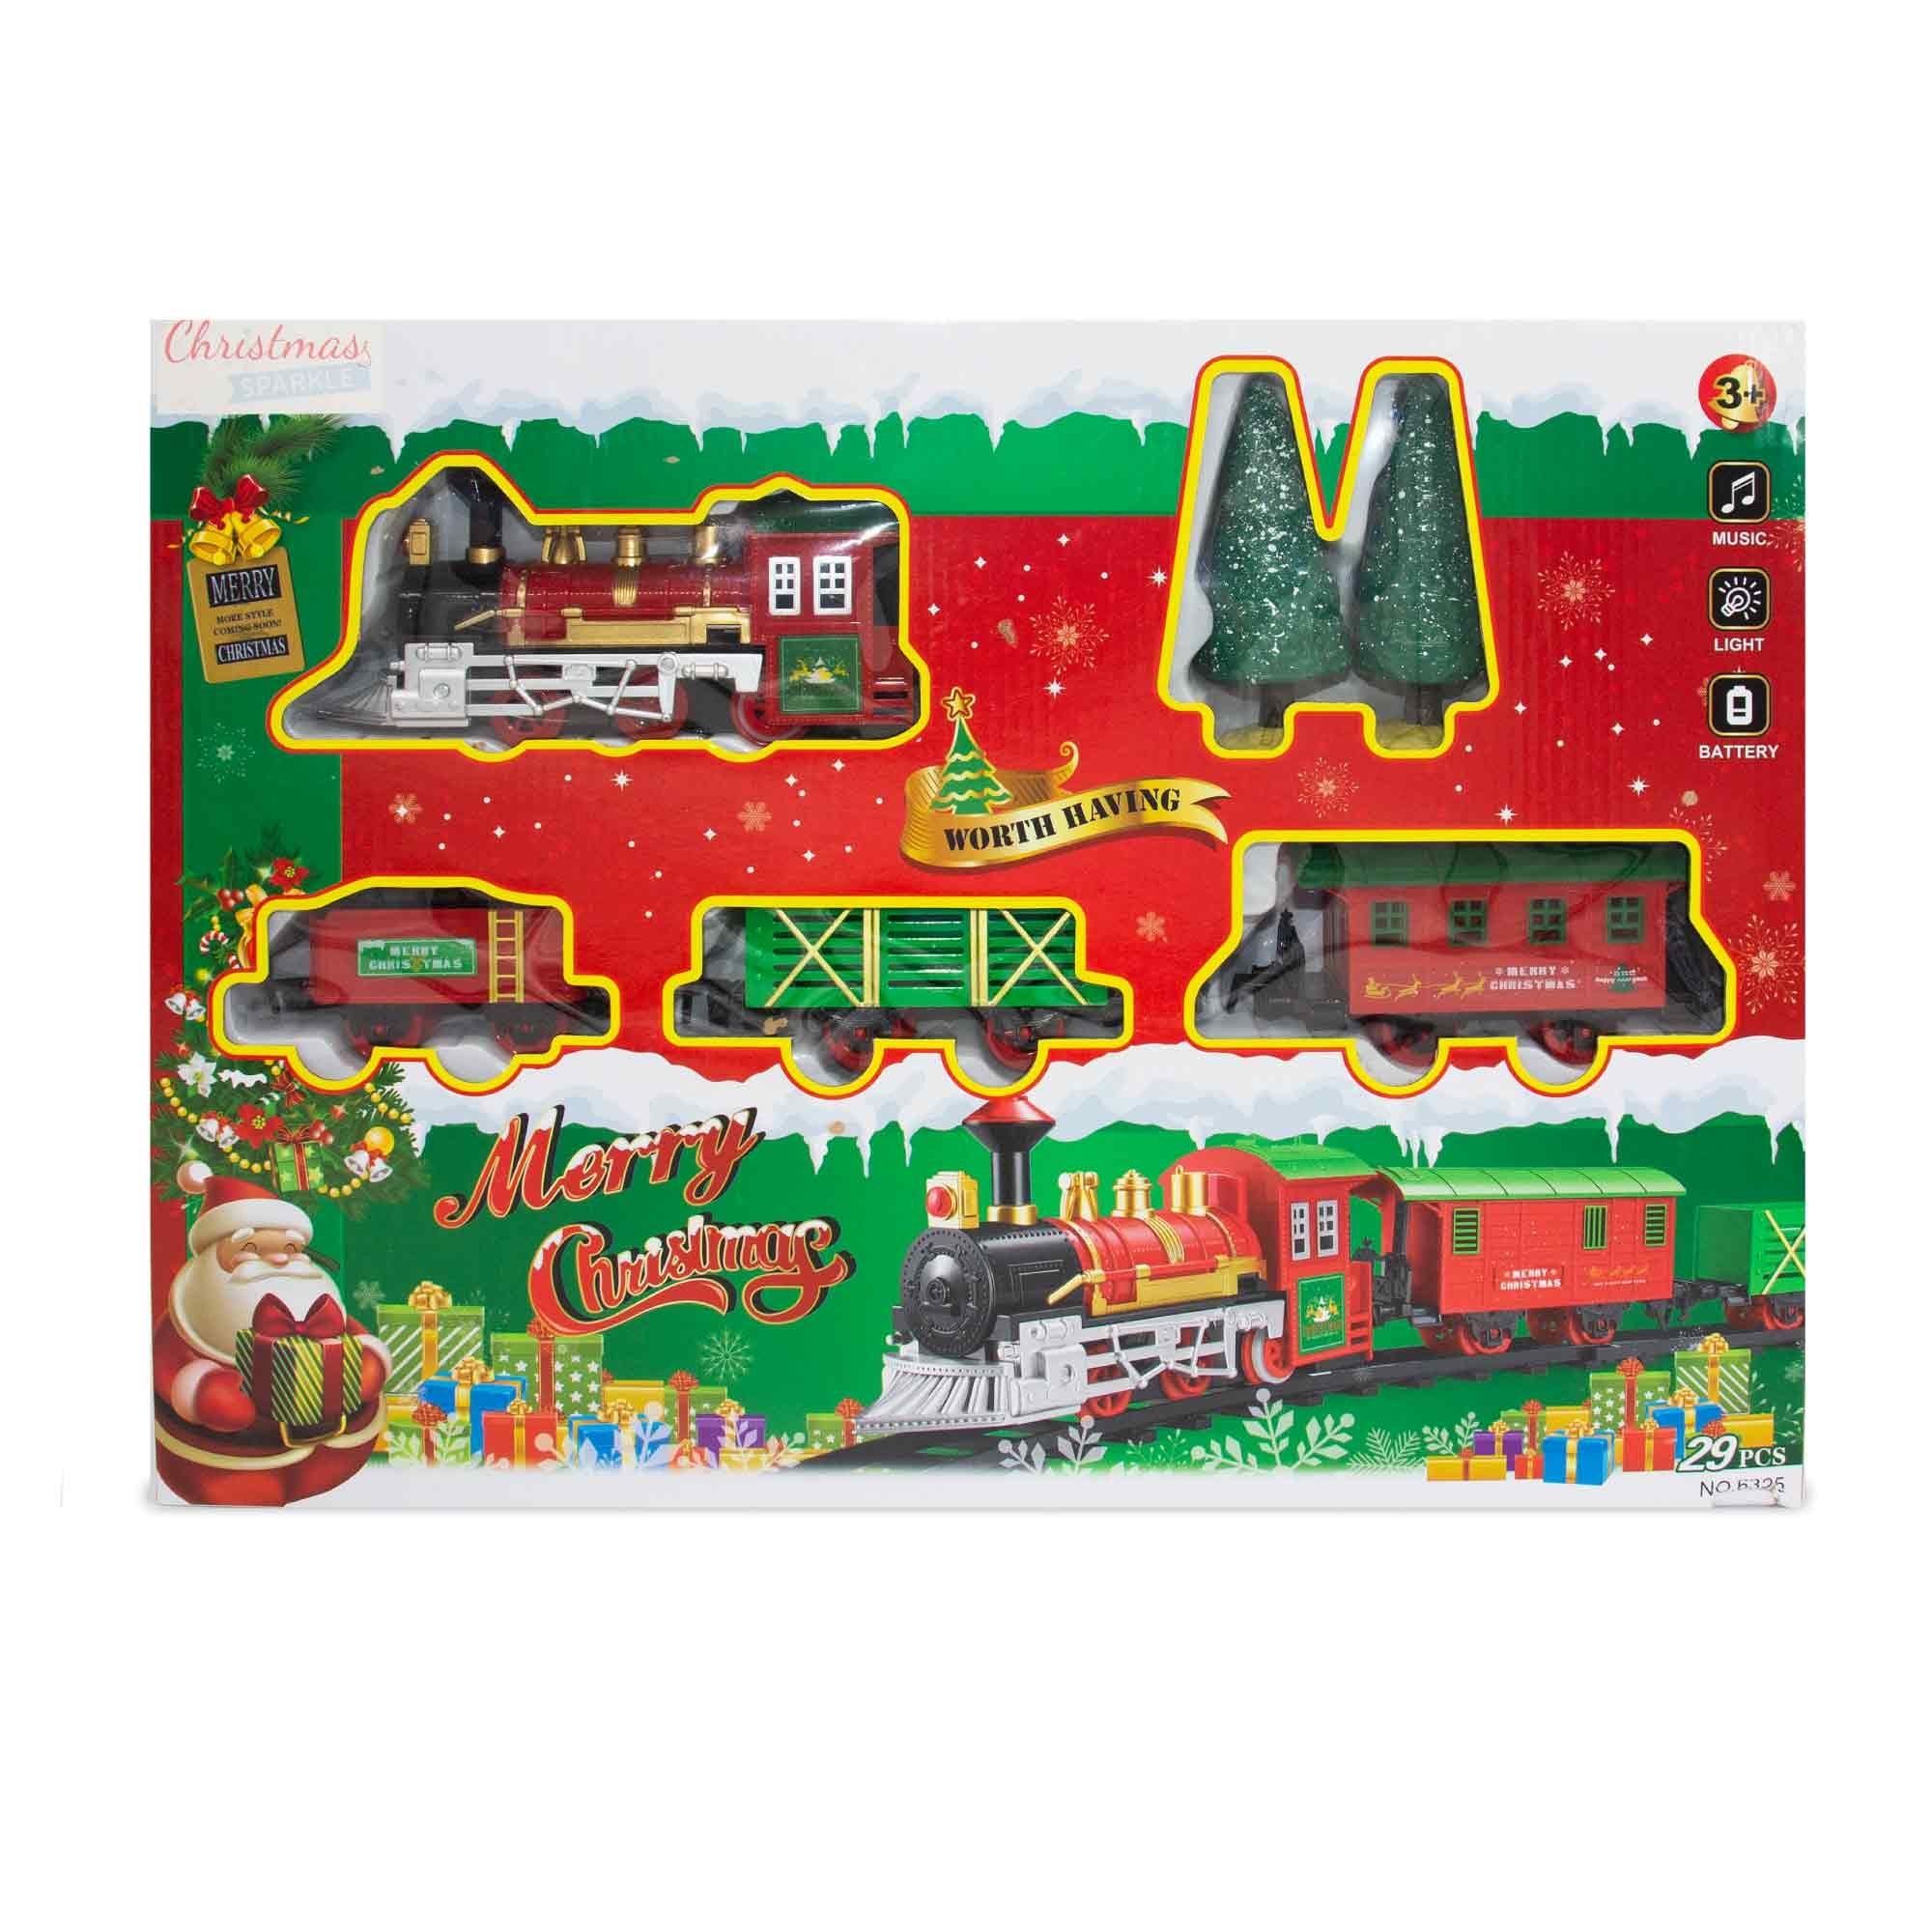 Christmas Sparkle Classic Train 29 piece Set with Lights and Music - Battery Operated  | TJ Hughes